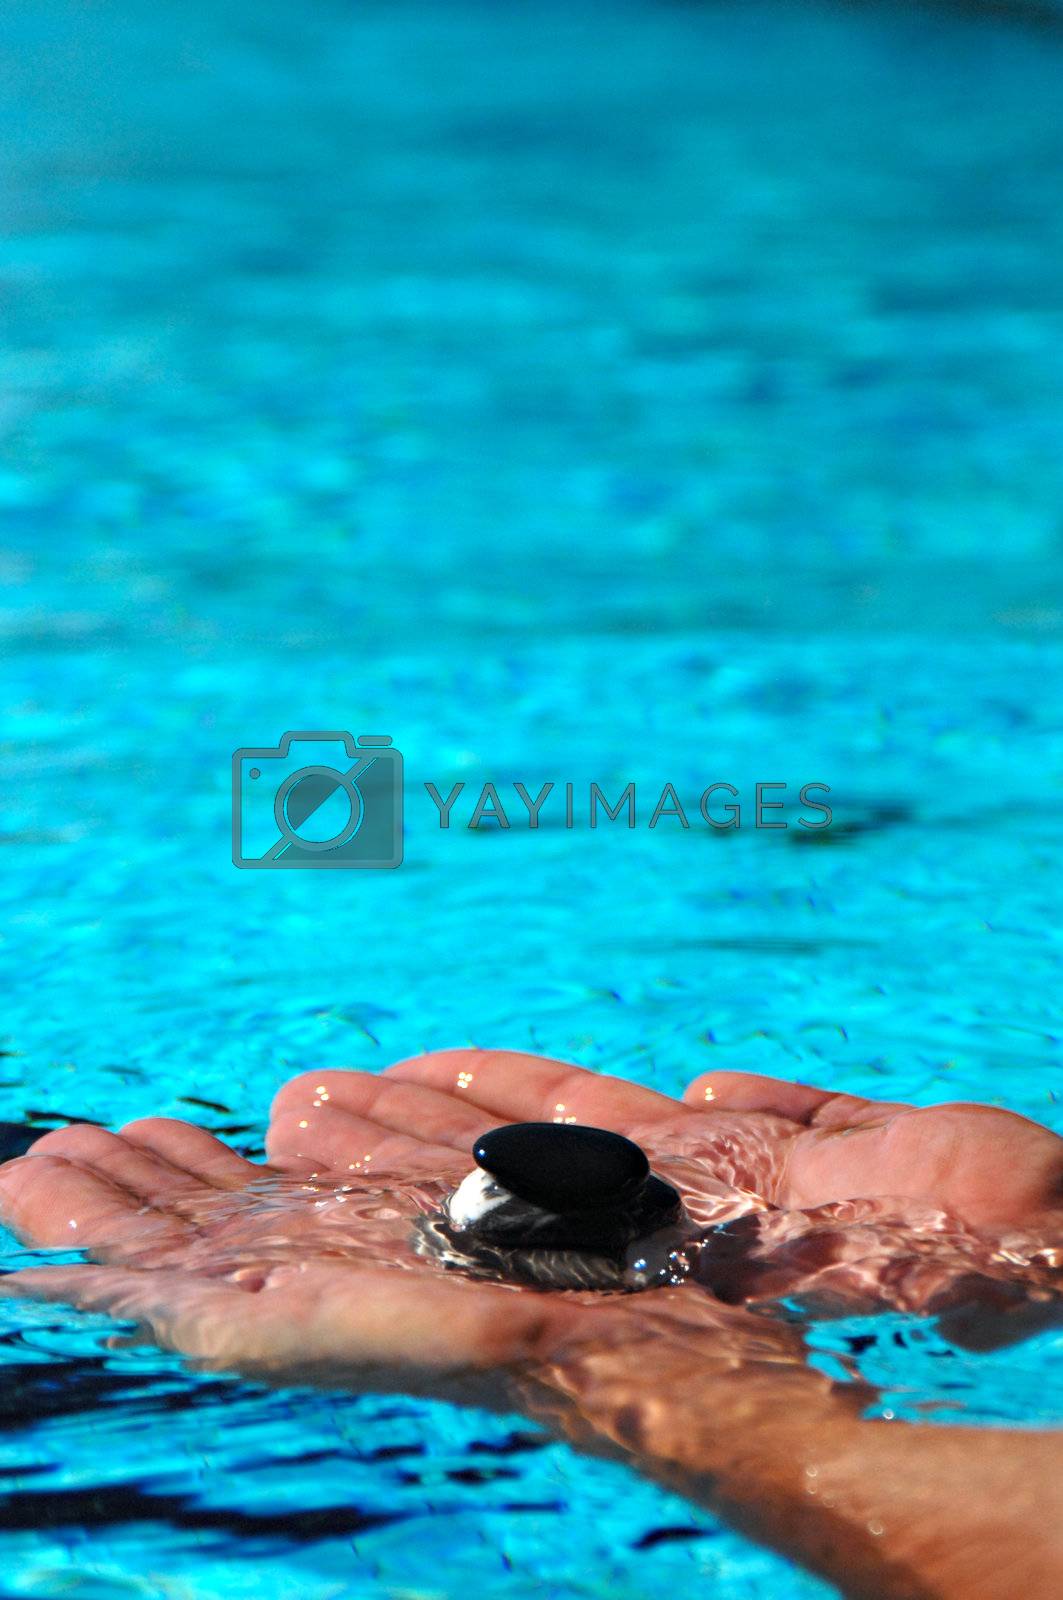 Royalty free image of ZEN by swimnews